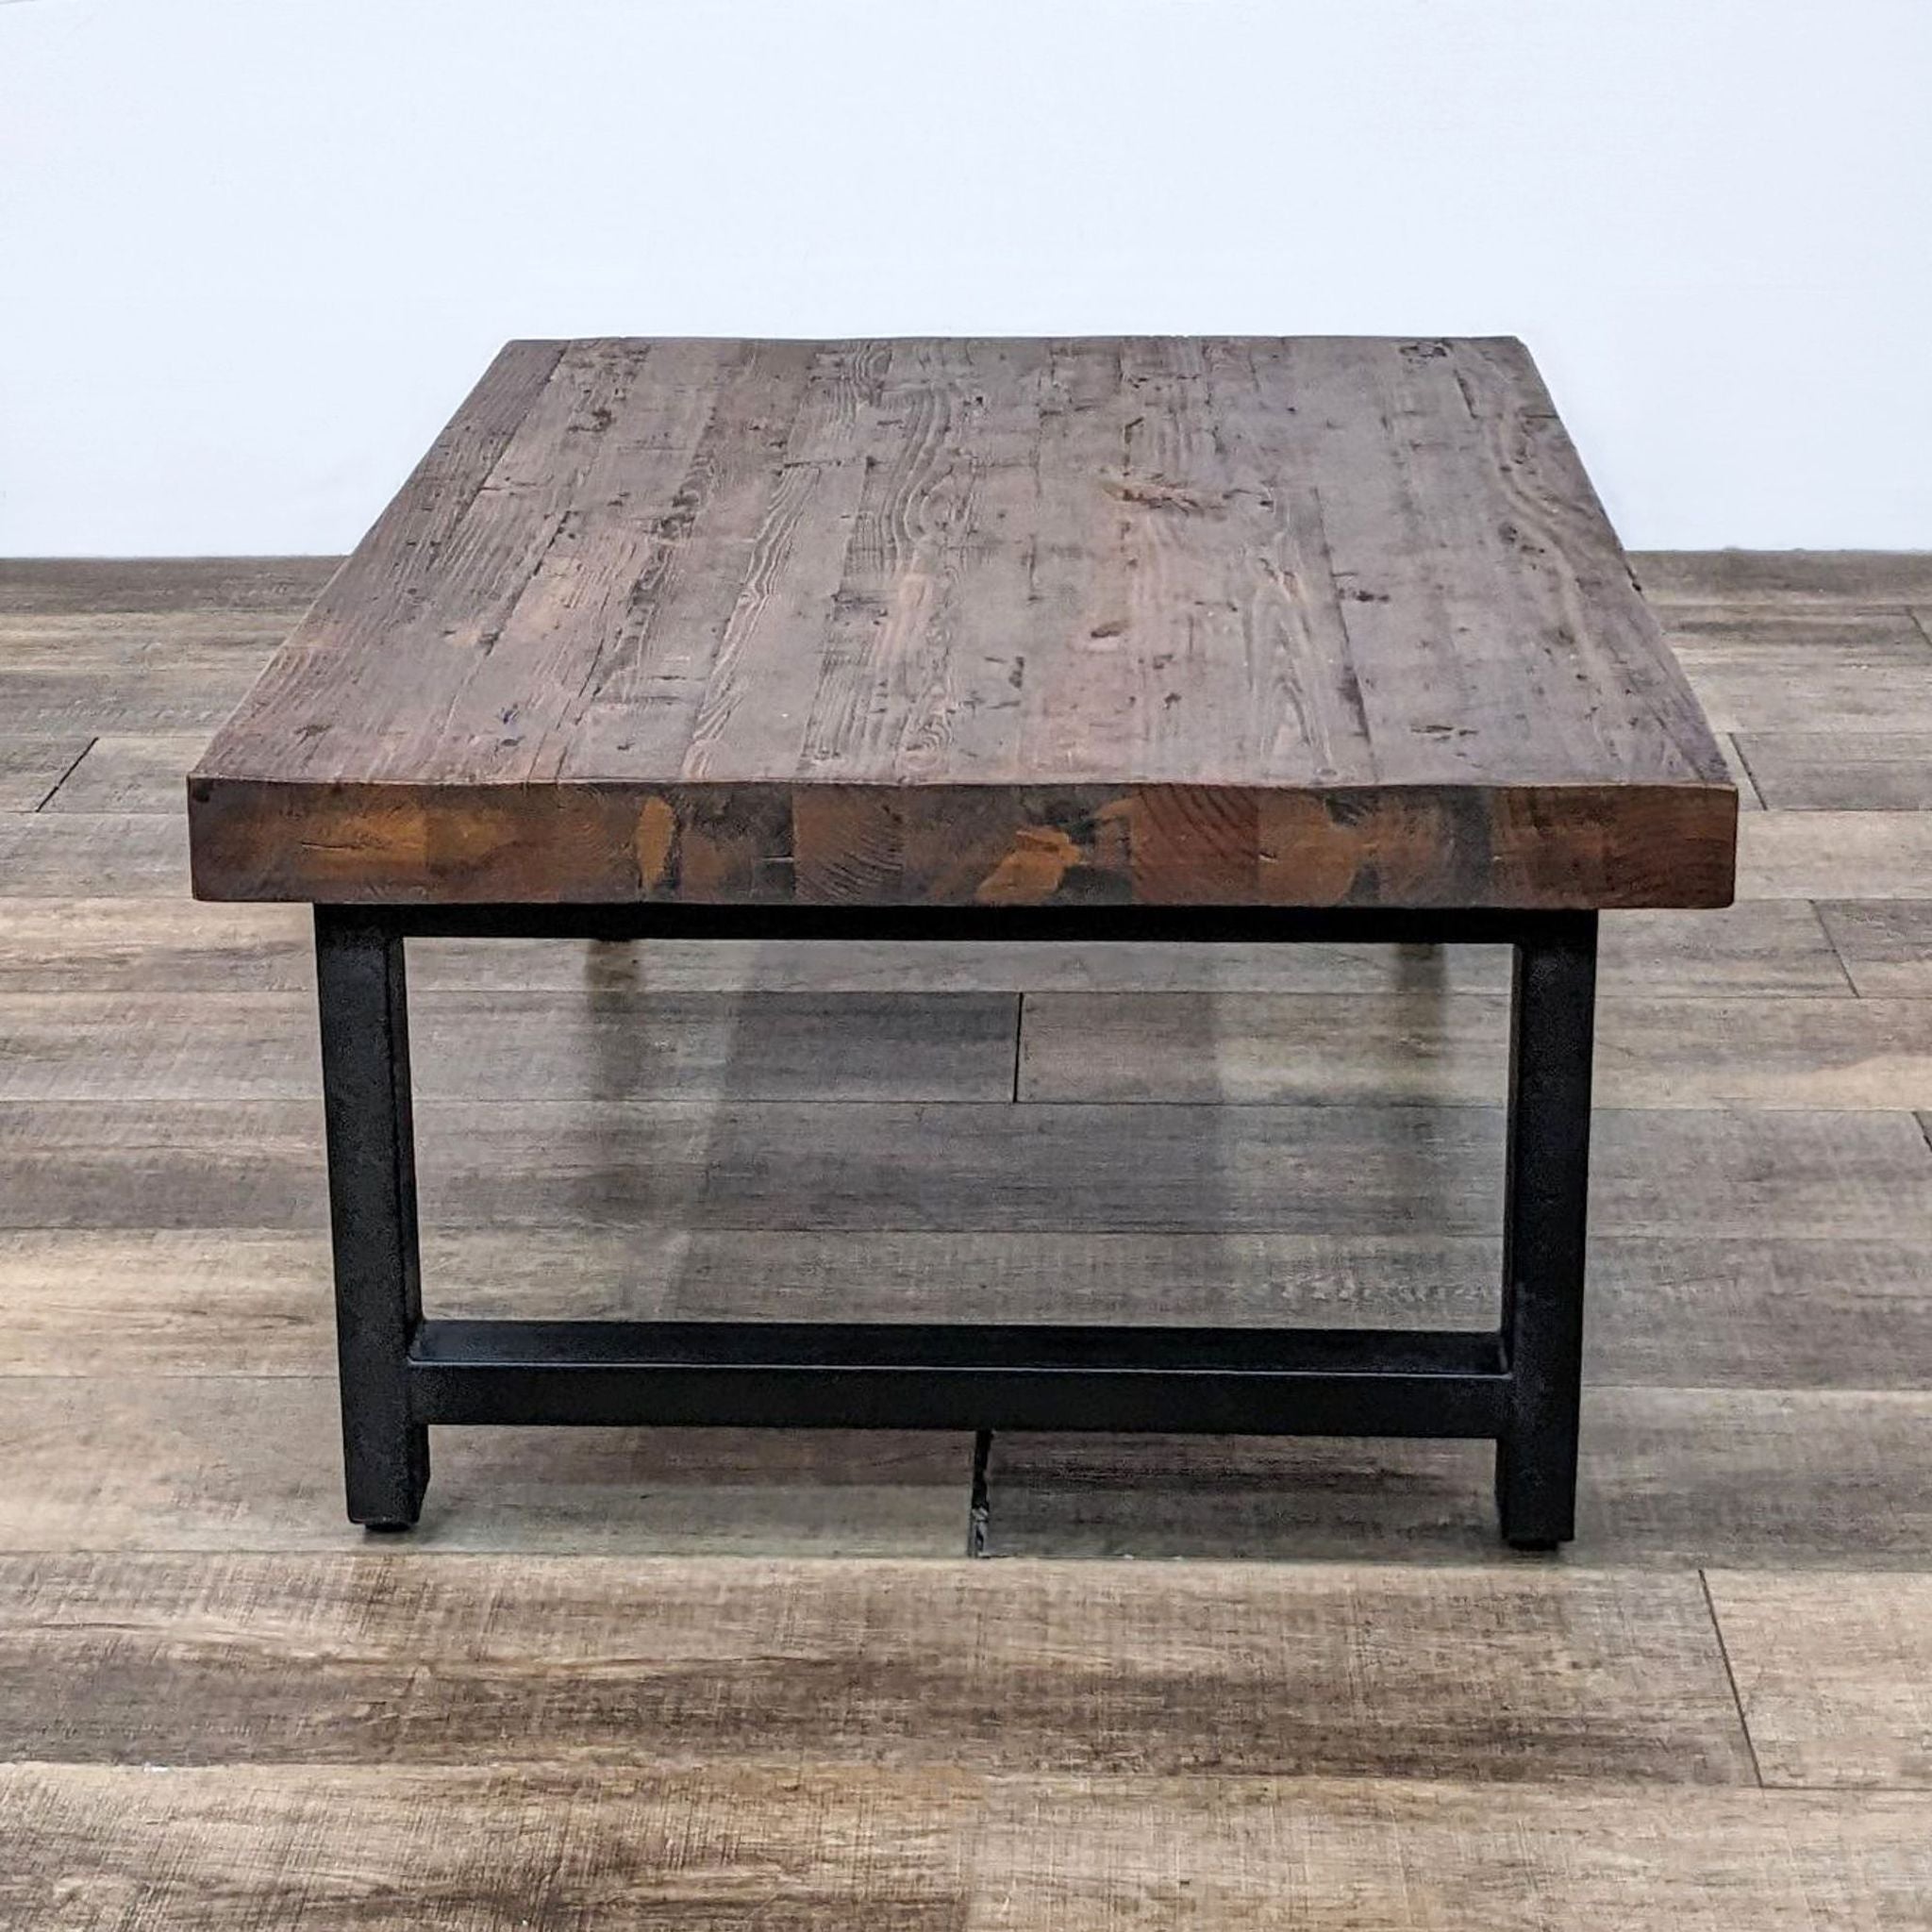 Rustic Reperch brand coffee table featuring distressed pine top, oil stains, and black legs with adjustable levelers for stability.